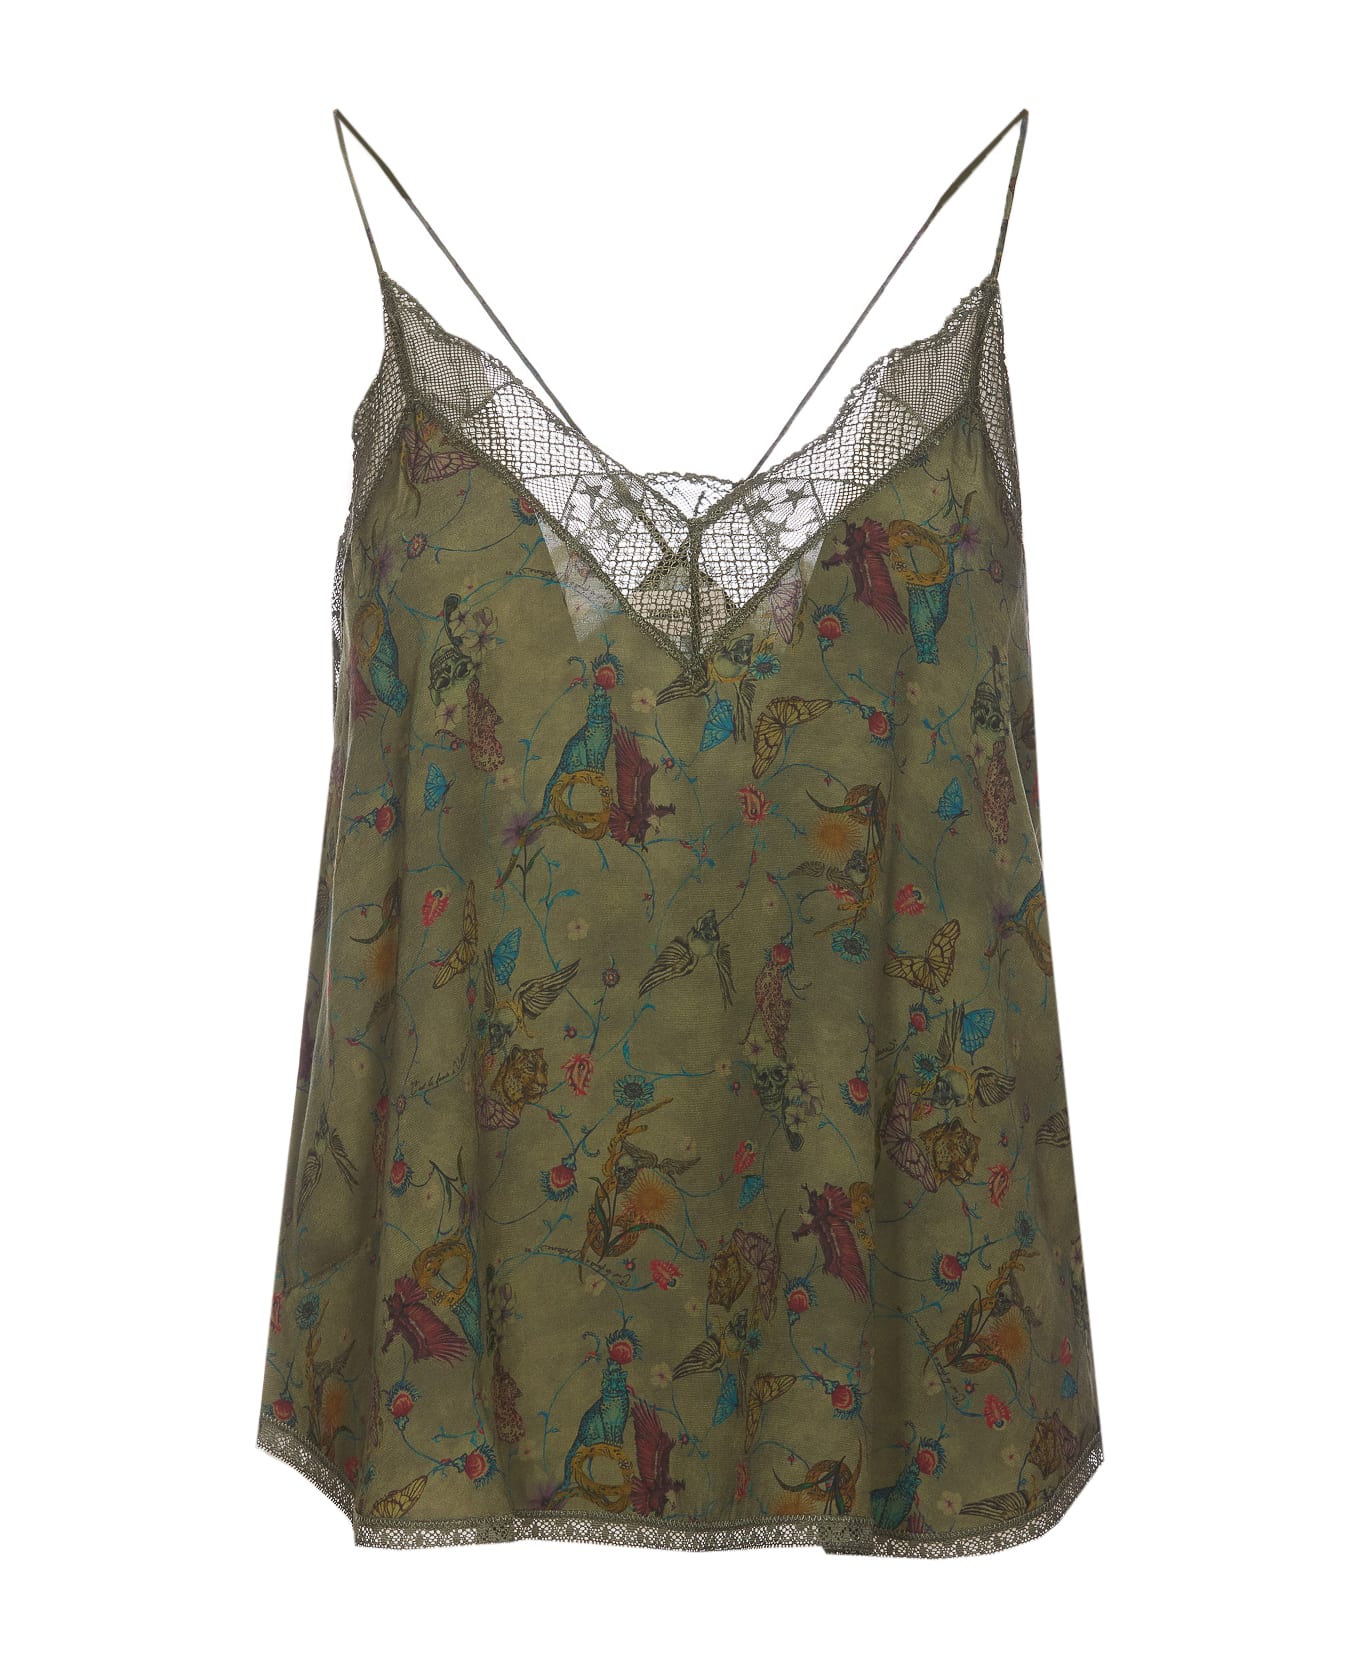 Zadig & Voltaire Christy Soft Holly Top - Green キャミソール